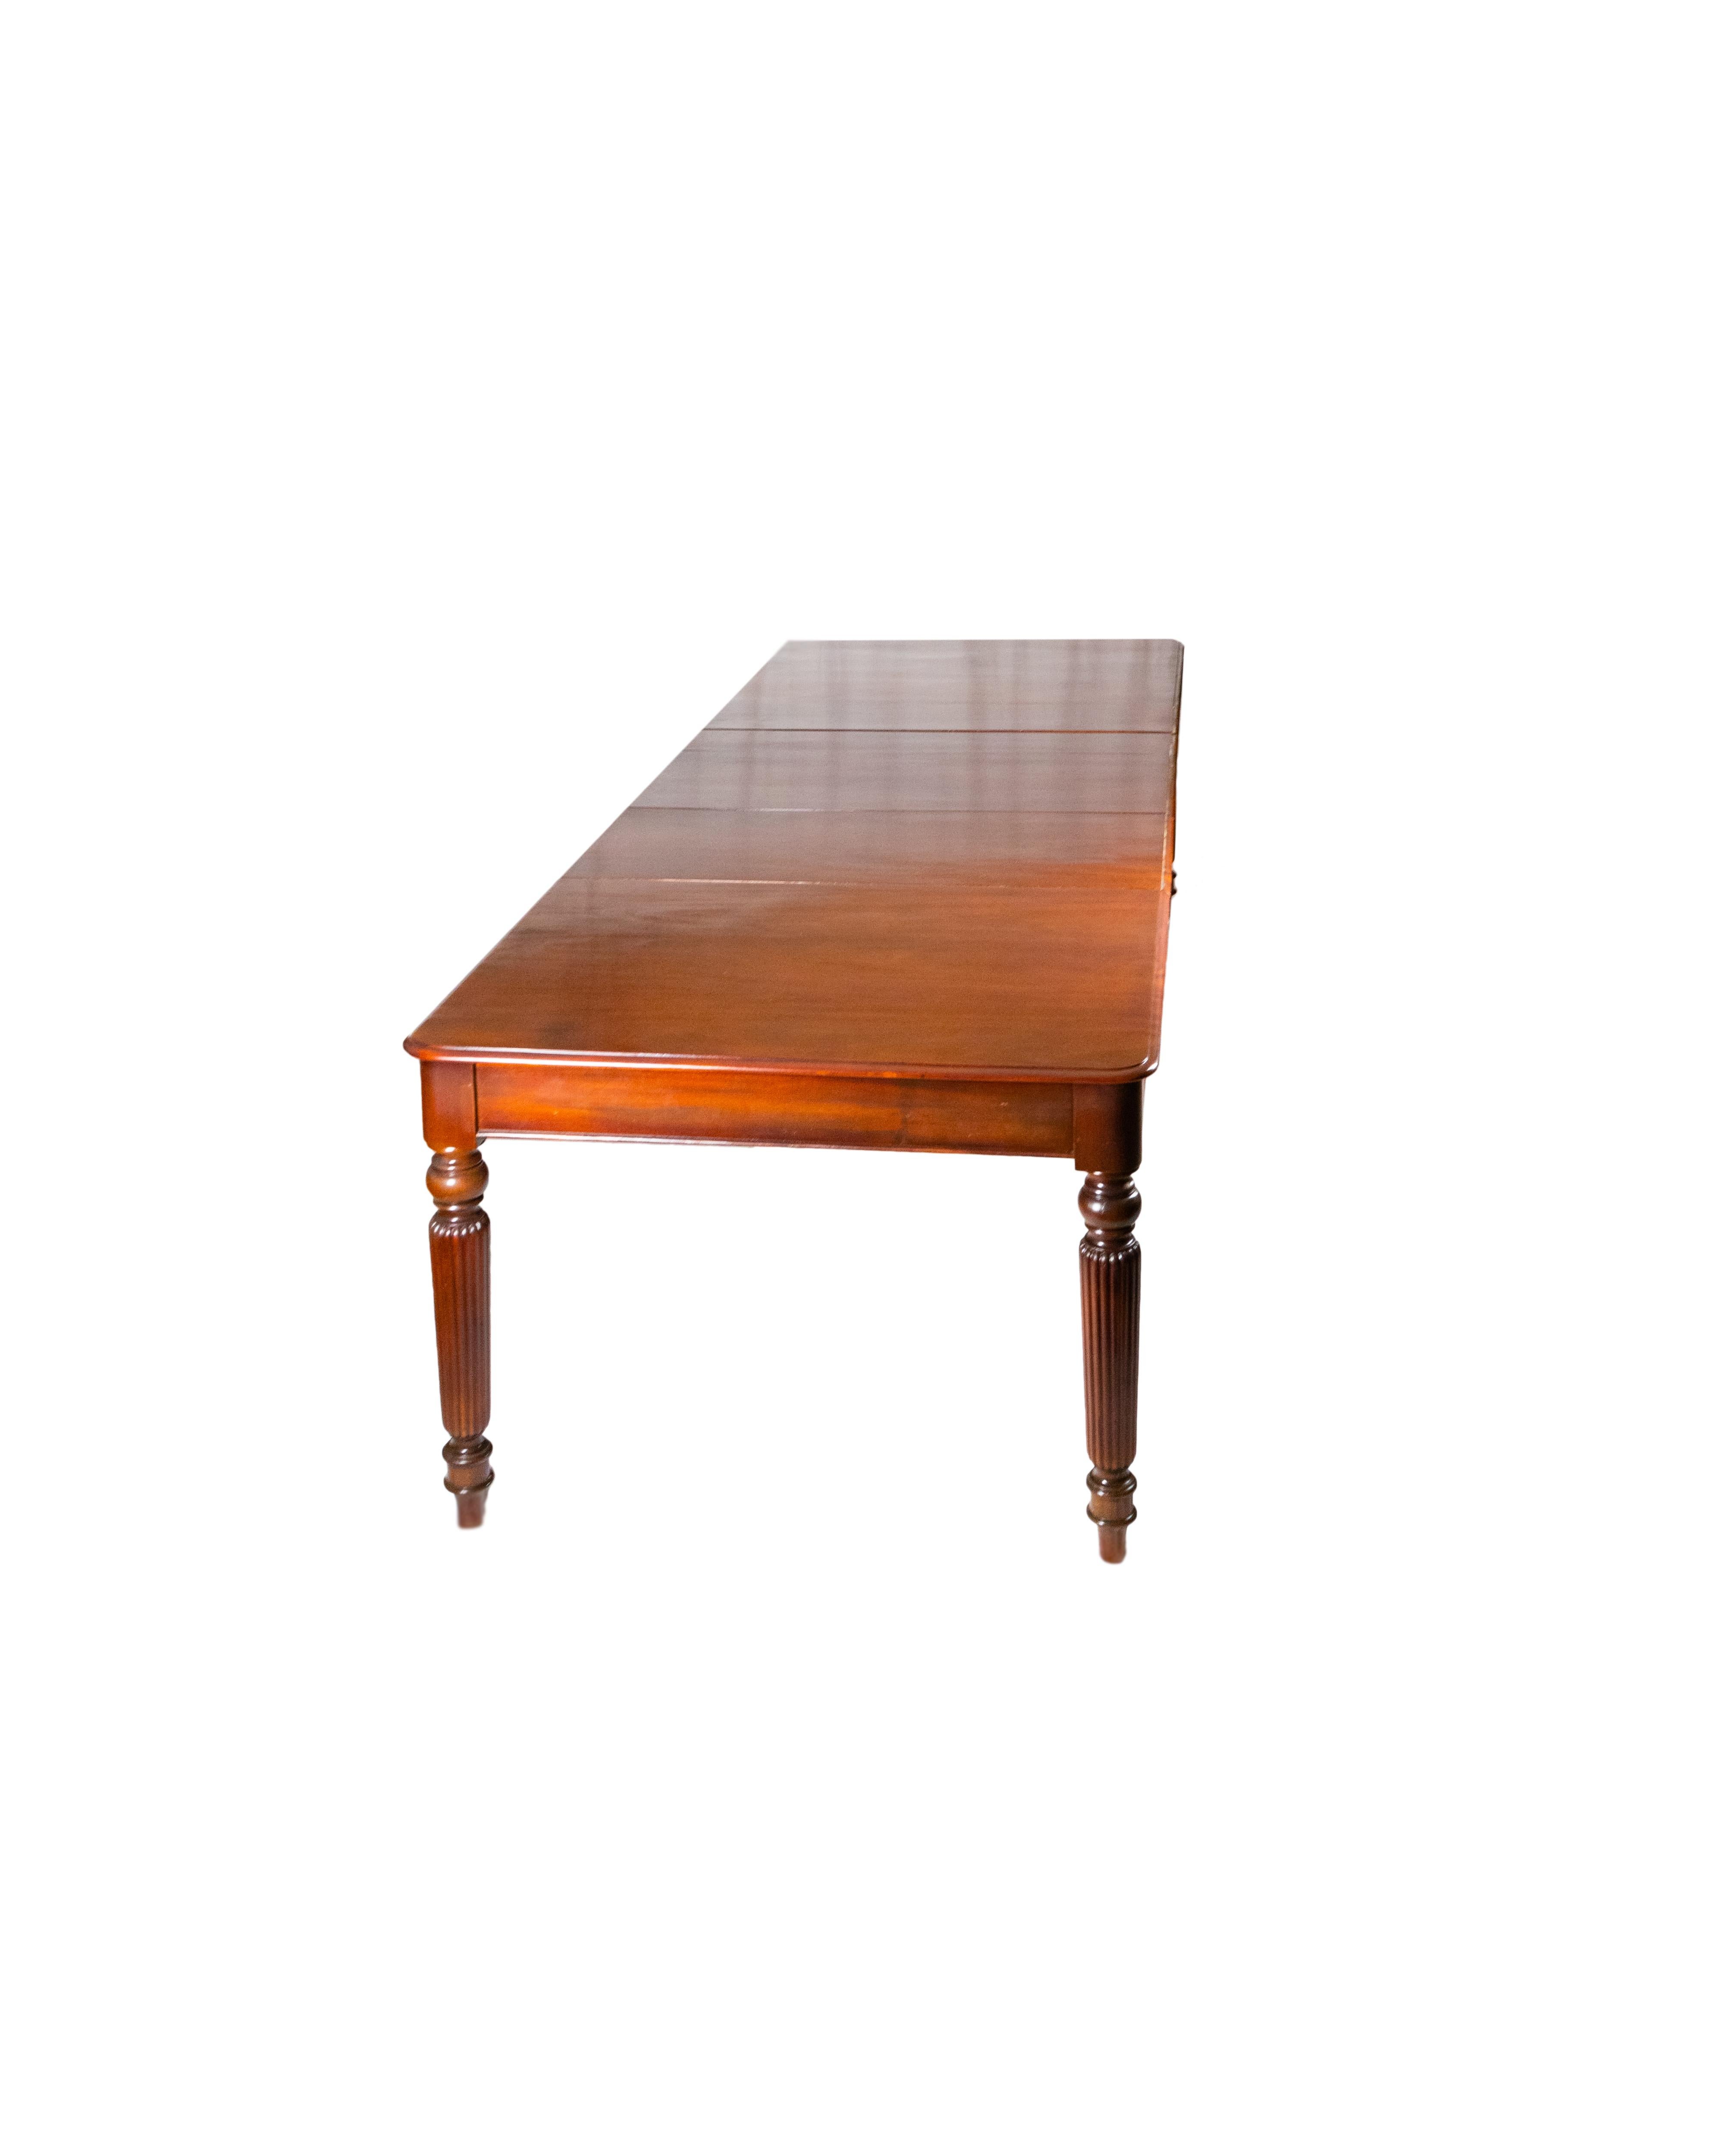 Hand-Crafted 19th Century Portuguese Mahogany Dining Table For Sale